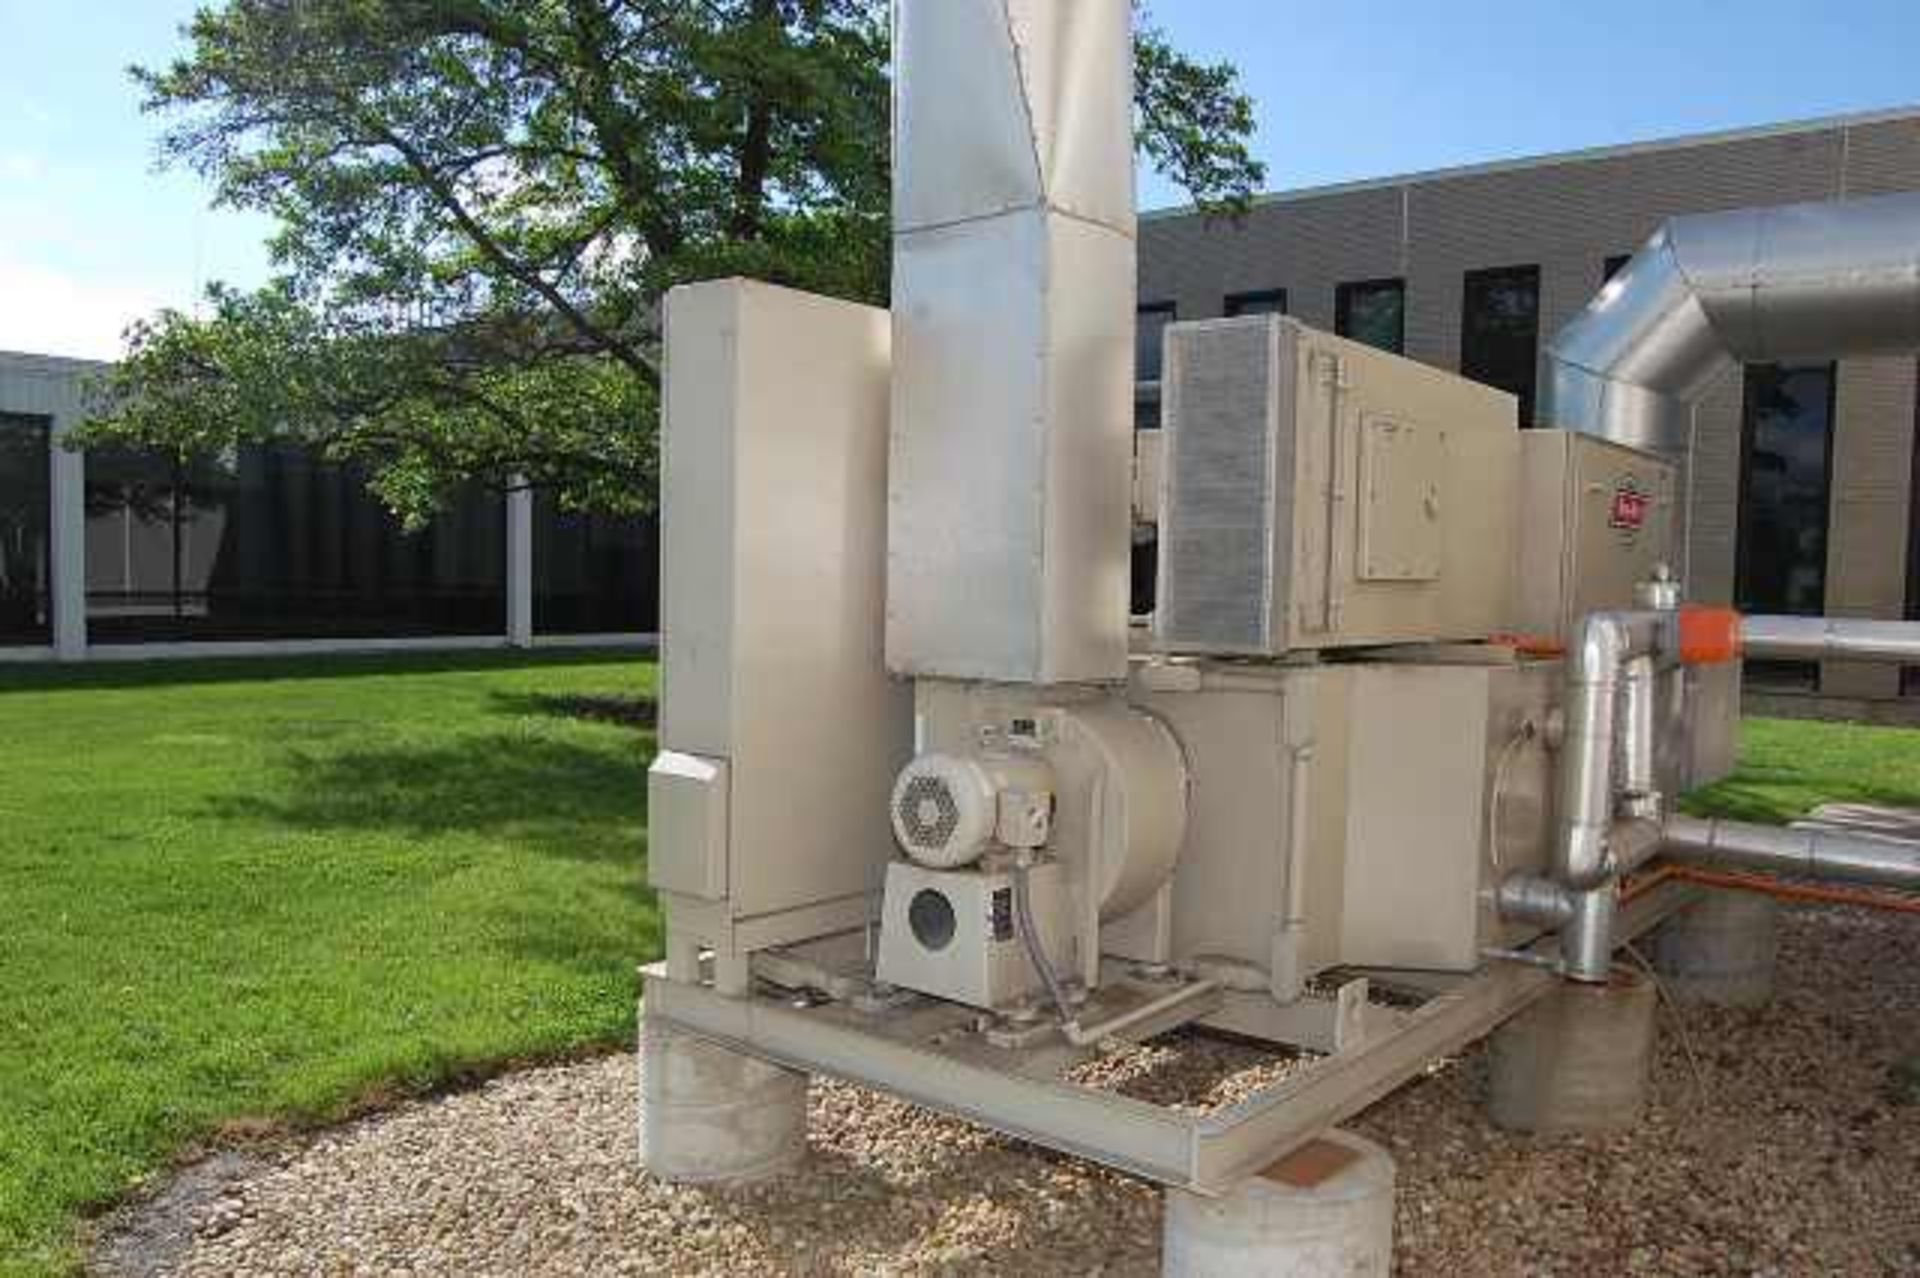 Bry Air Chill Water/Natural Gas Dehumidification System, Model #VFB-ELL-24-G4-2500CWA, SN 2013G9573 - Image 3 of 4